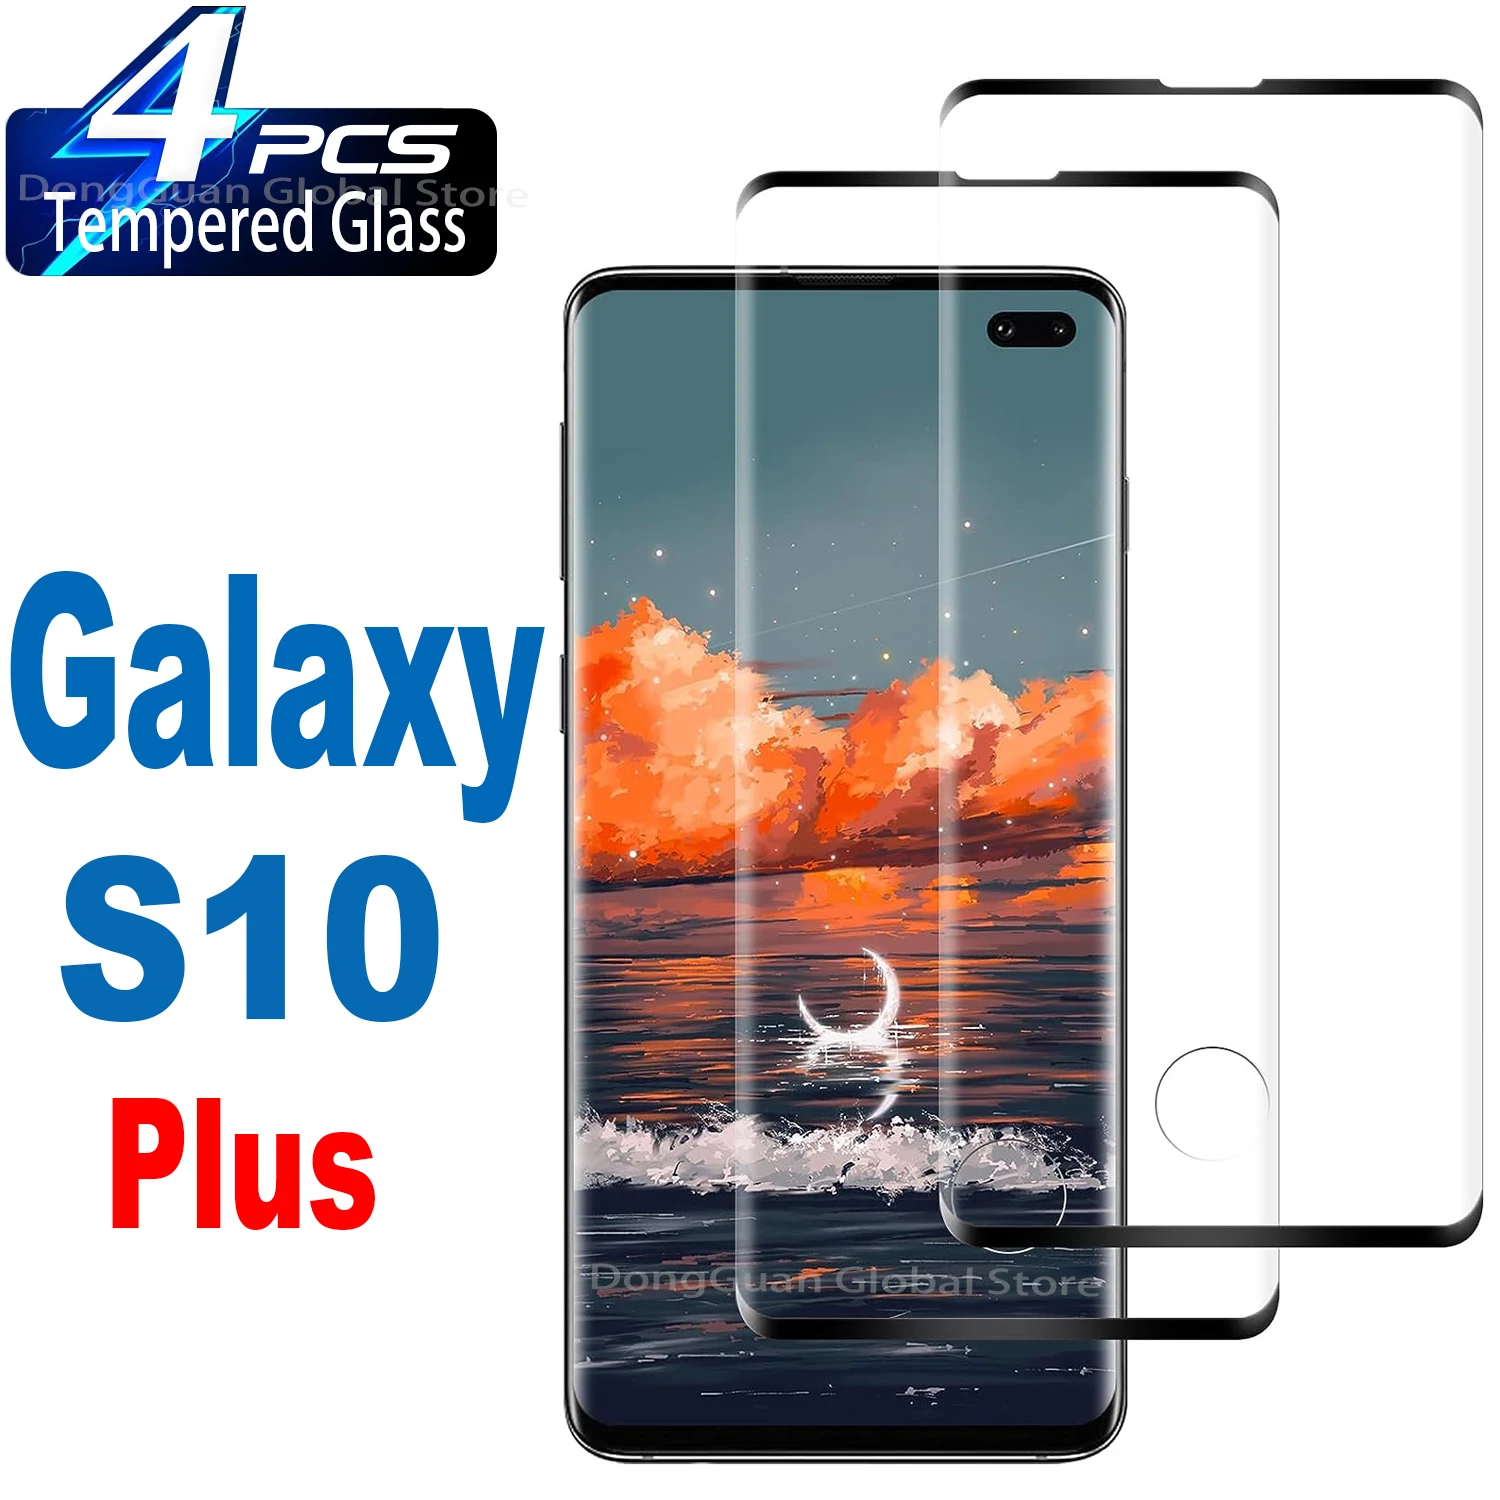 2/4Pcs Tempered Glass For Samsung Galaxy S10 Plus S10+ S20 S20+ Plus Screen Protector Glass soft ceramic frosted matte tempered glass for samsung galaxy note 20 10 plus 9 8 s20 ultra s9 s8 s10 plus screen protector